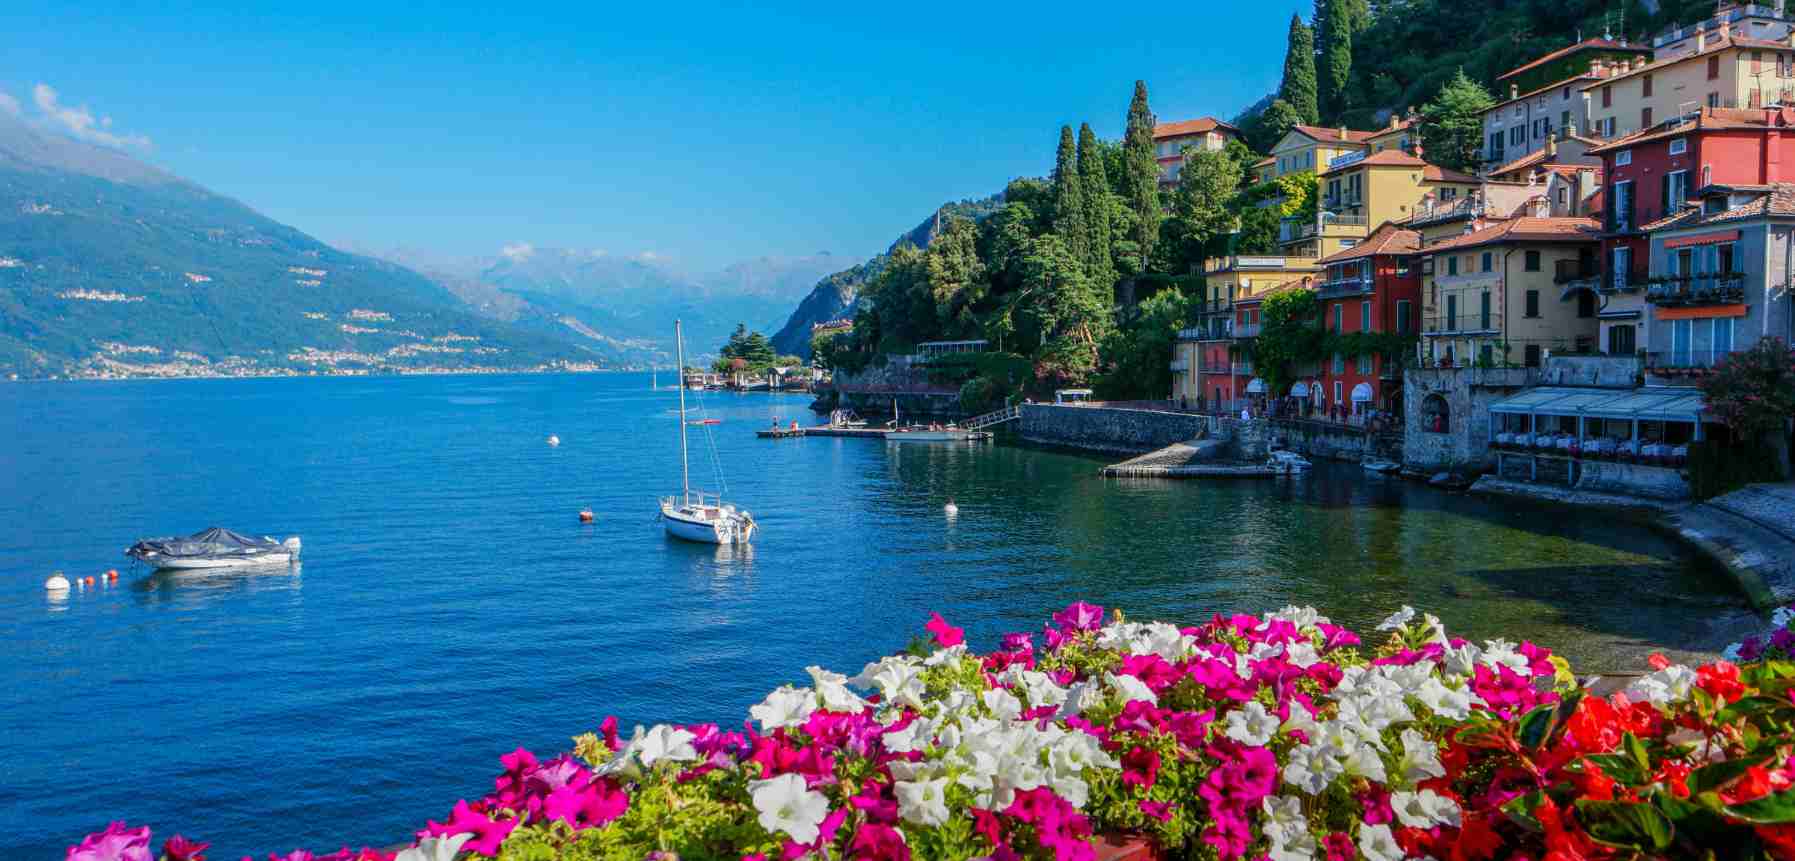 Go to the waters of Lake Como